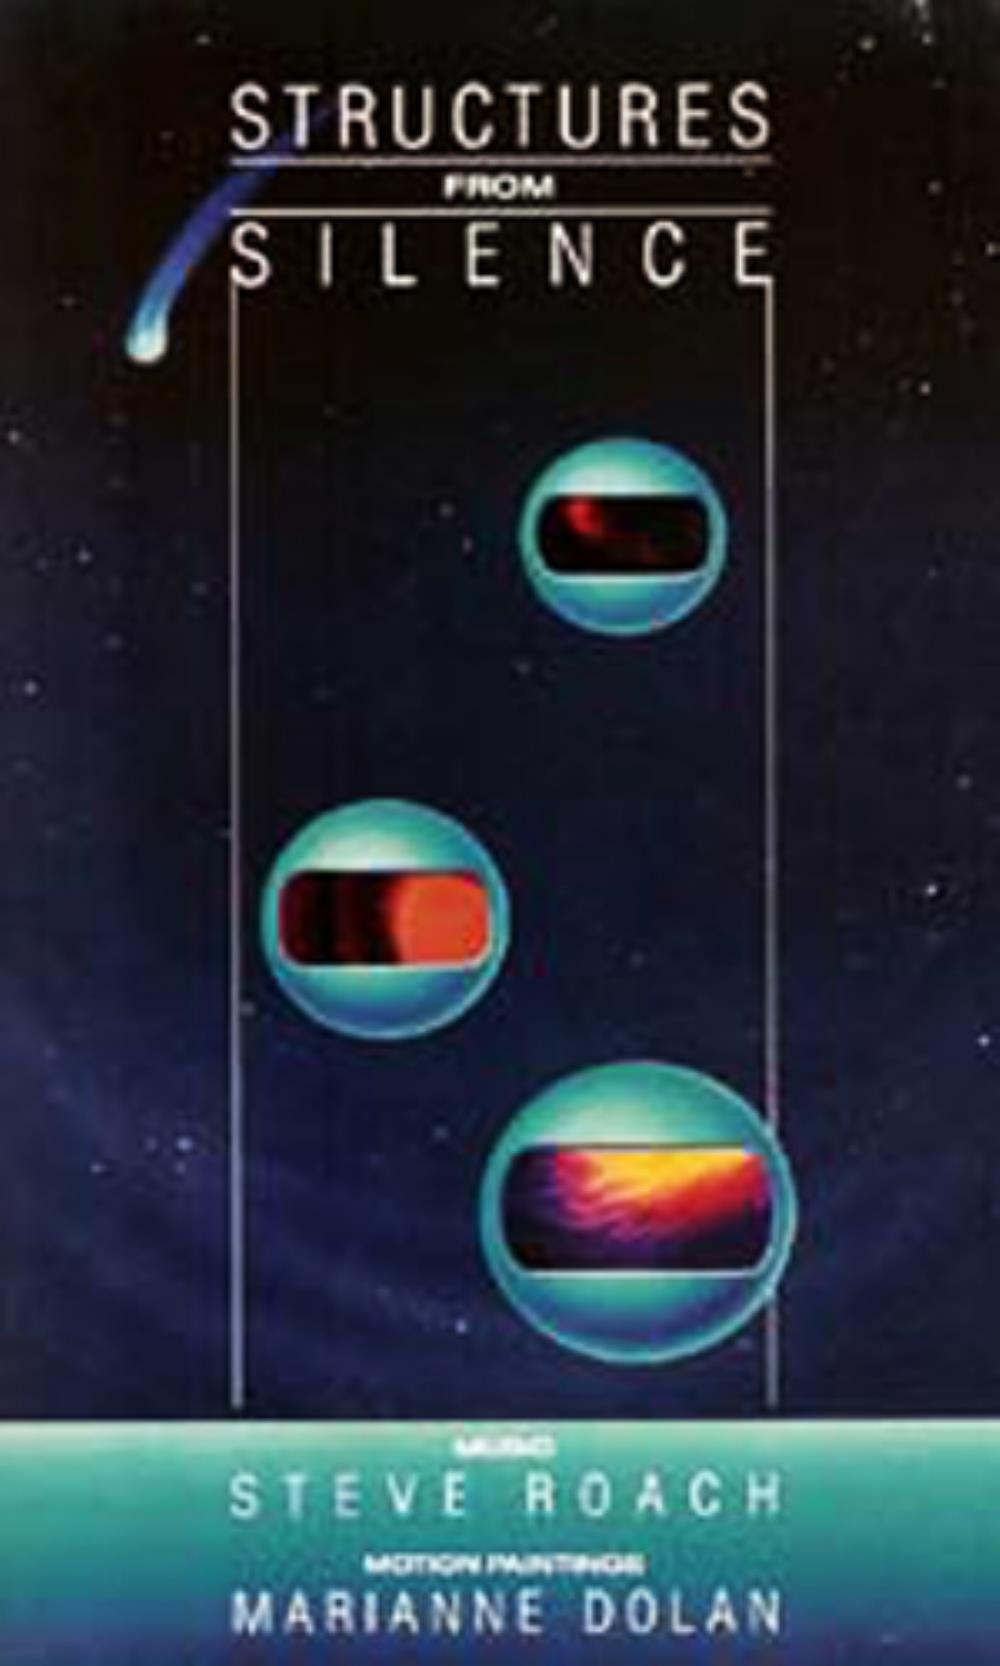 Steve Roach Structures from Silence album cover